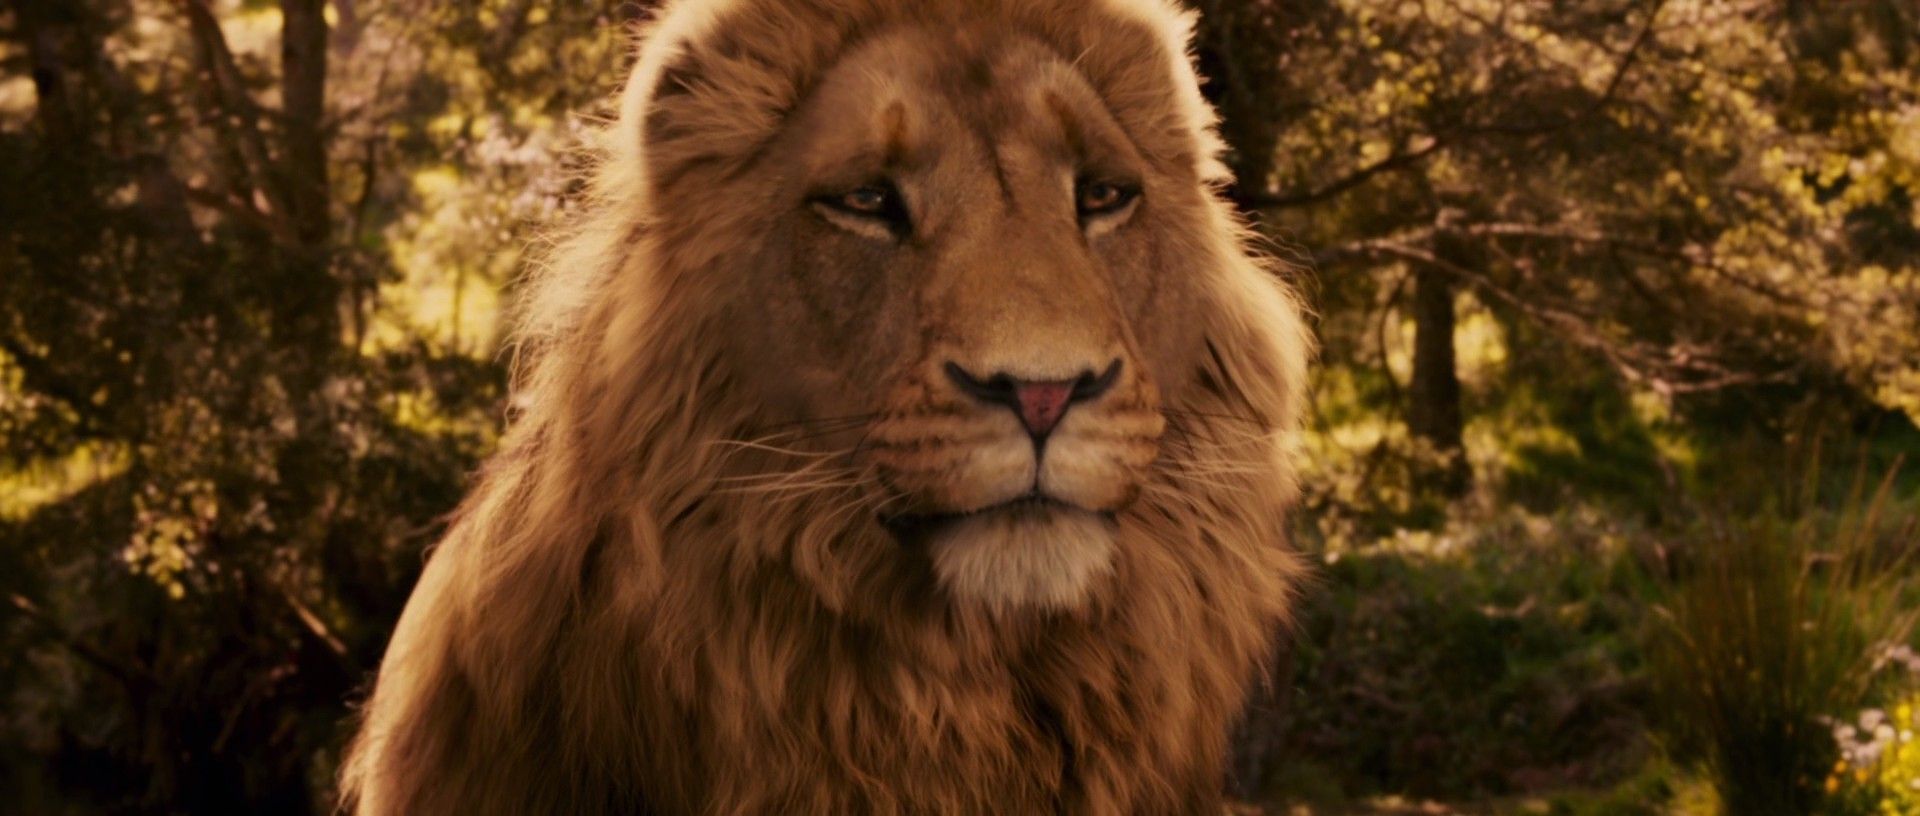 Pictures Of Narnia The Lion The Witch And The Wardrobe - Wallpaper ...